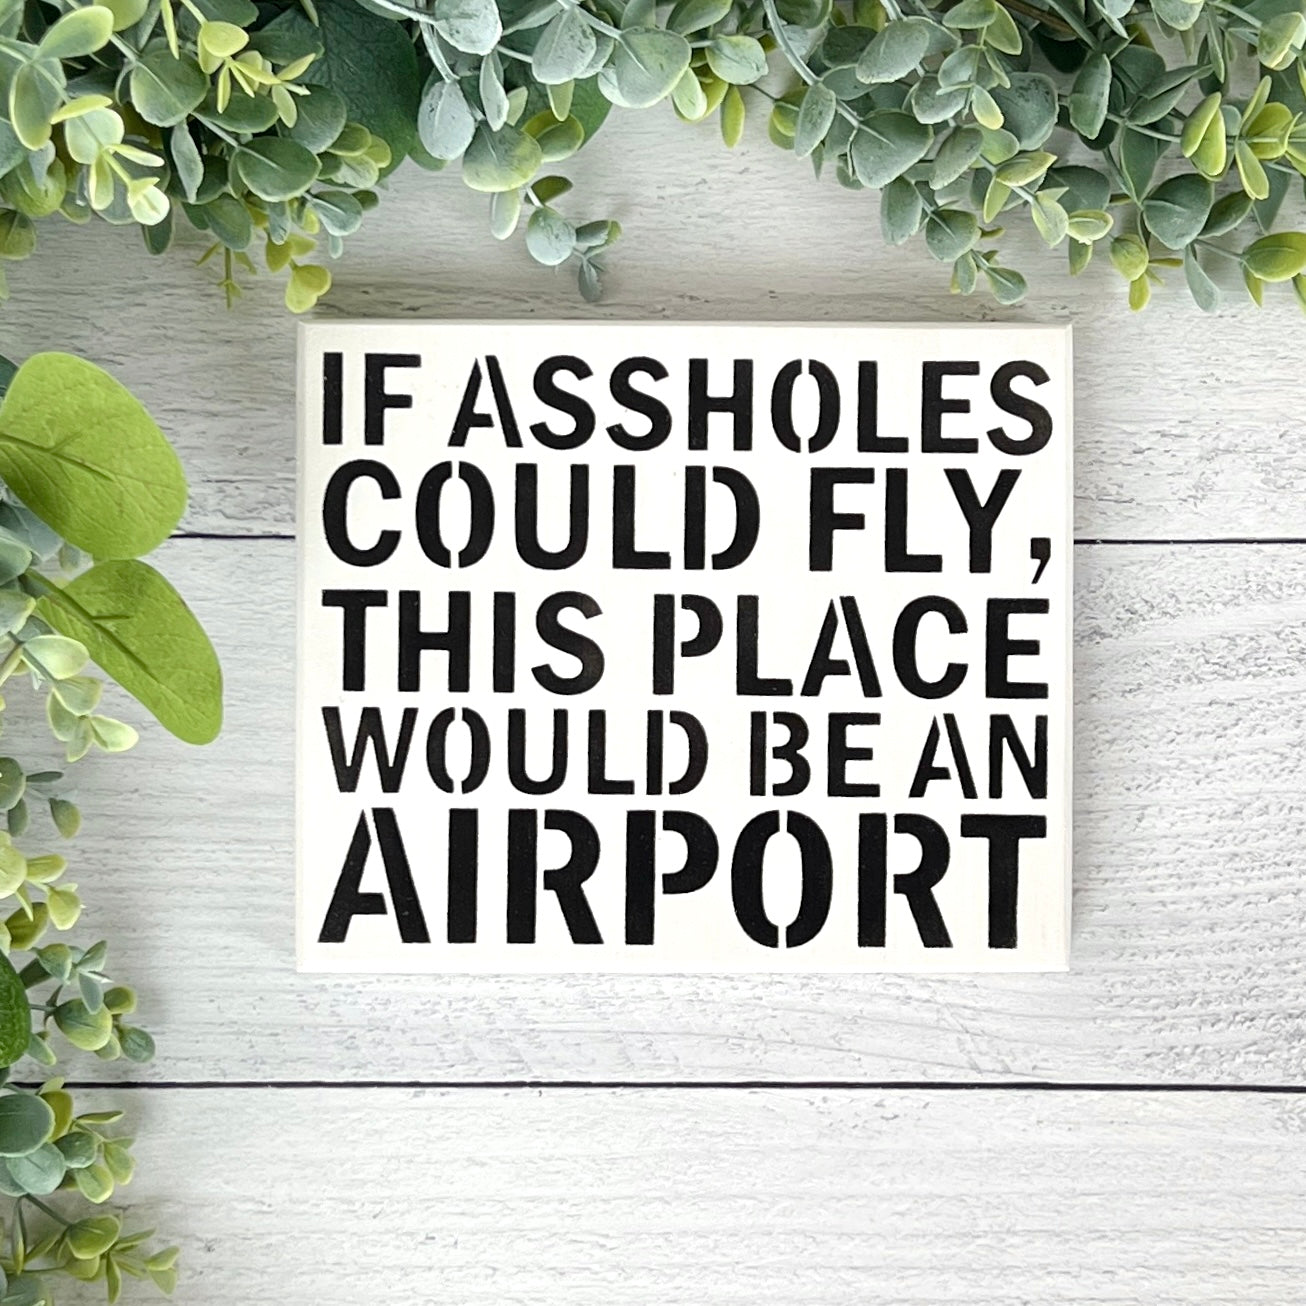 If Assholes could fly this place would be an airport